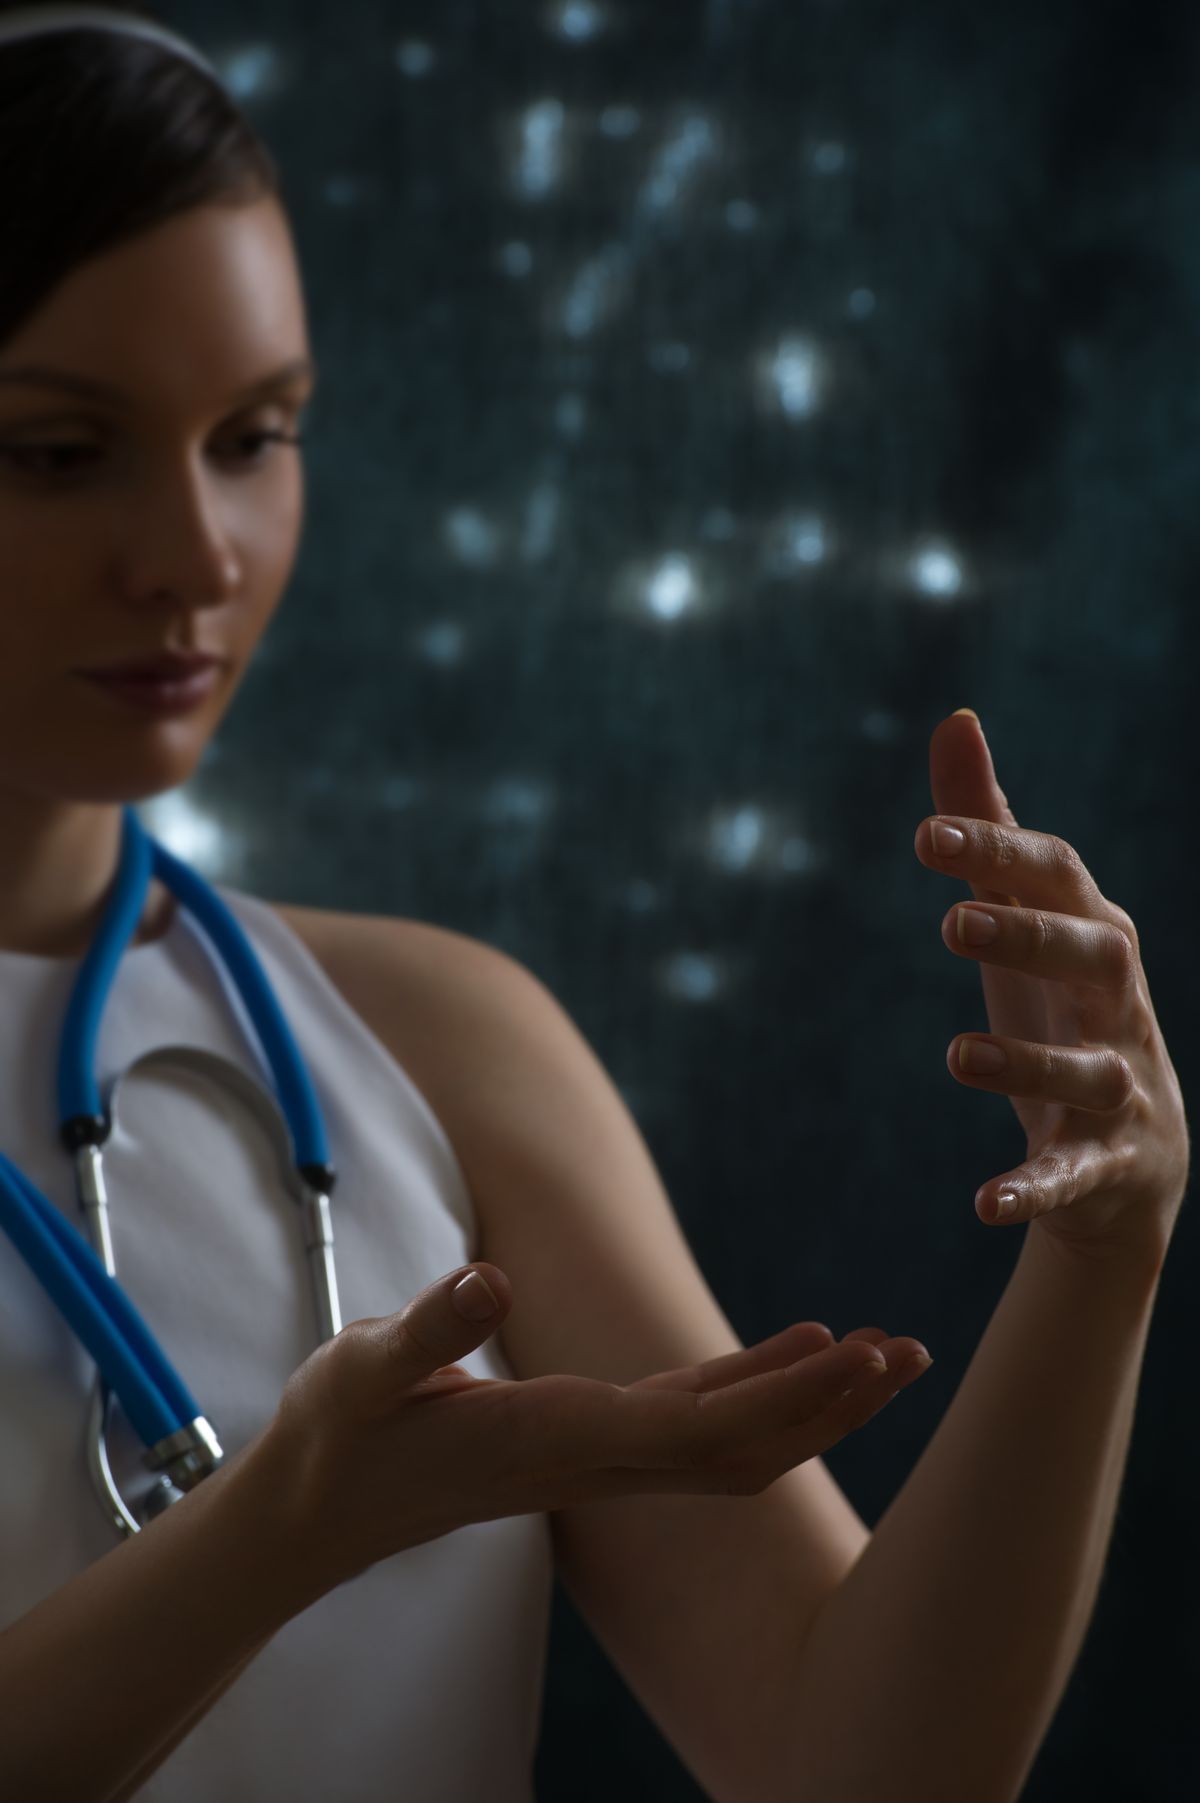 Pretty female doctor with stethoscope wearing futuristic clothes holding something in her hands